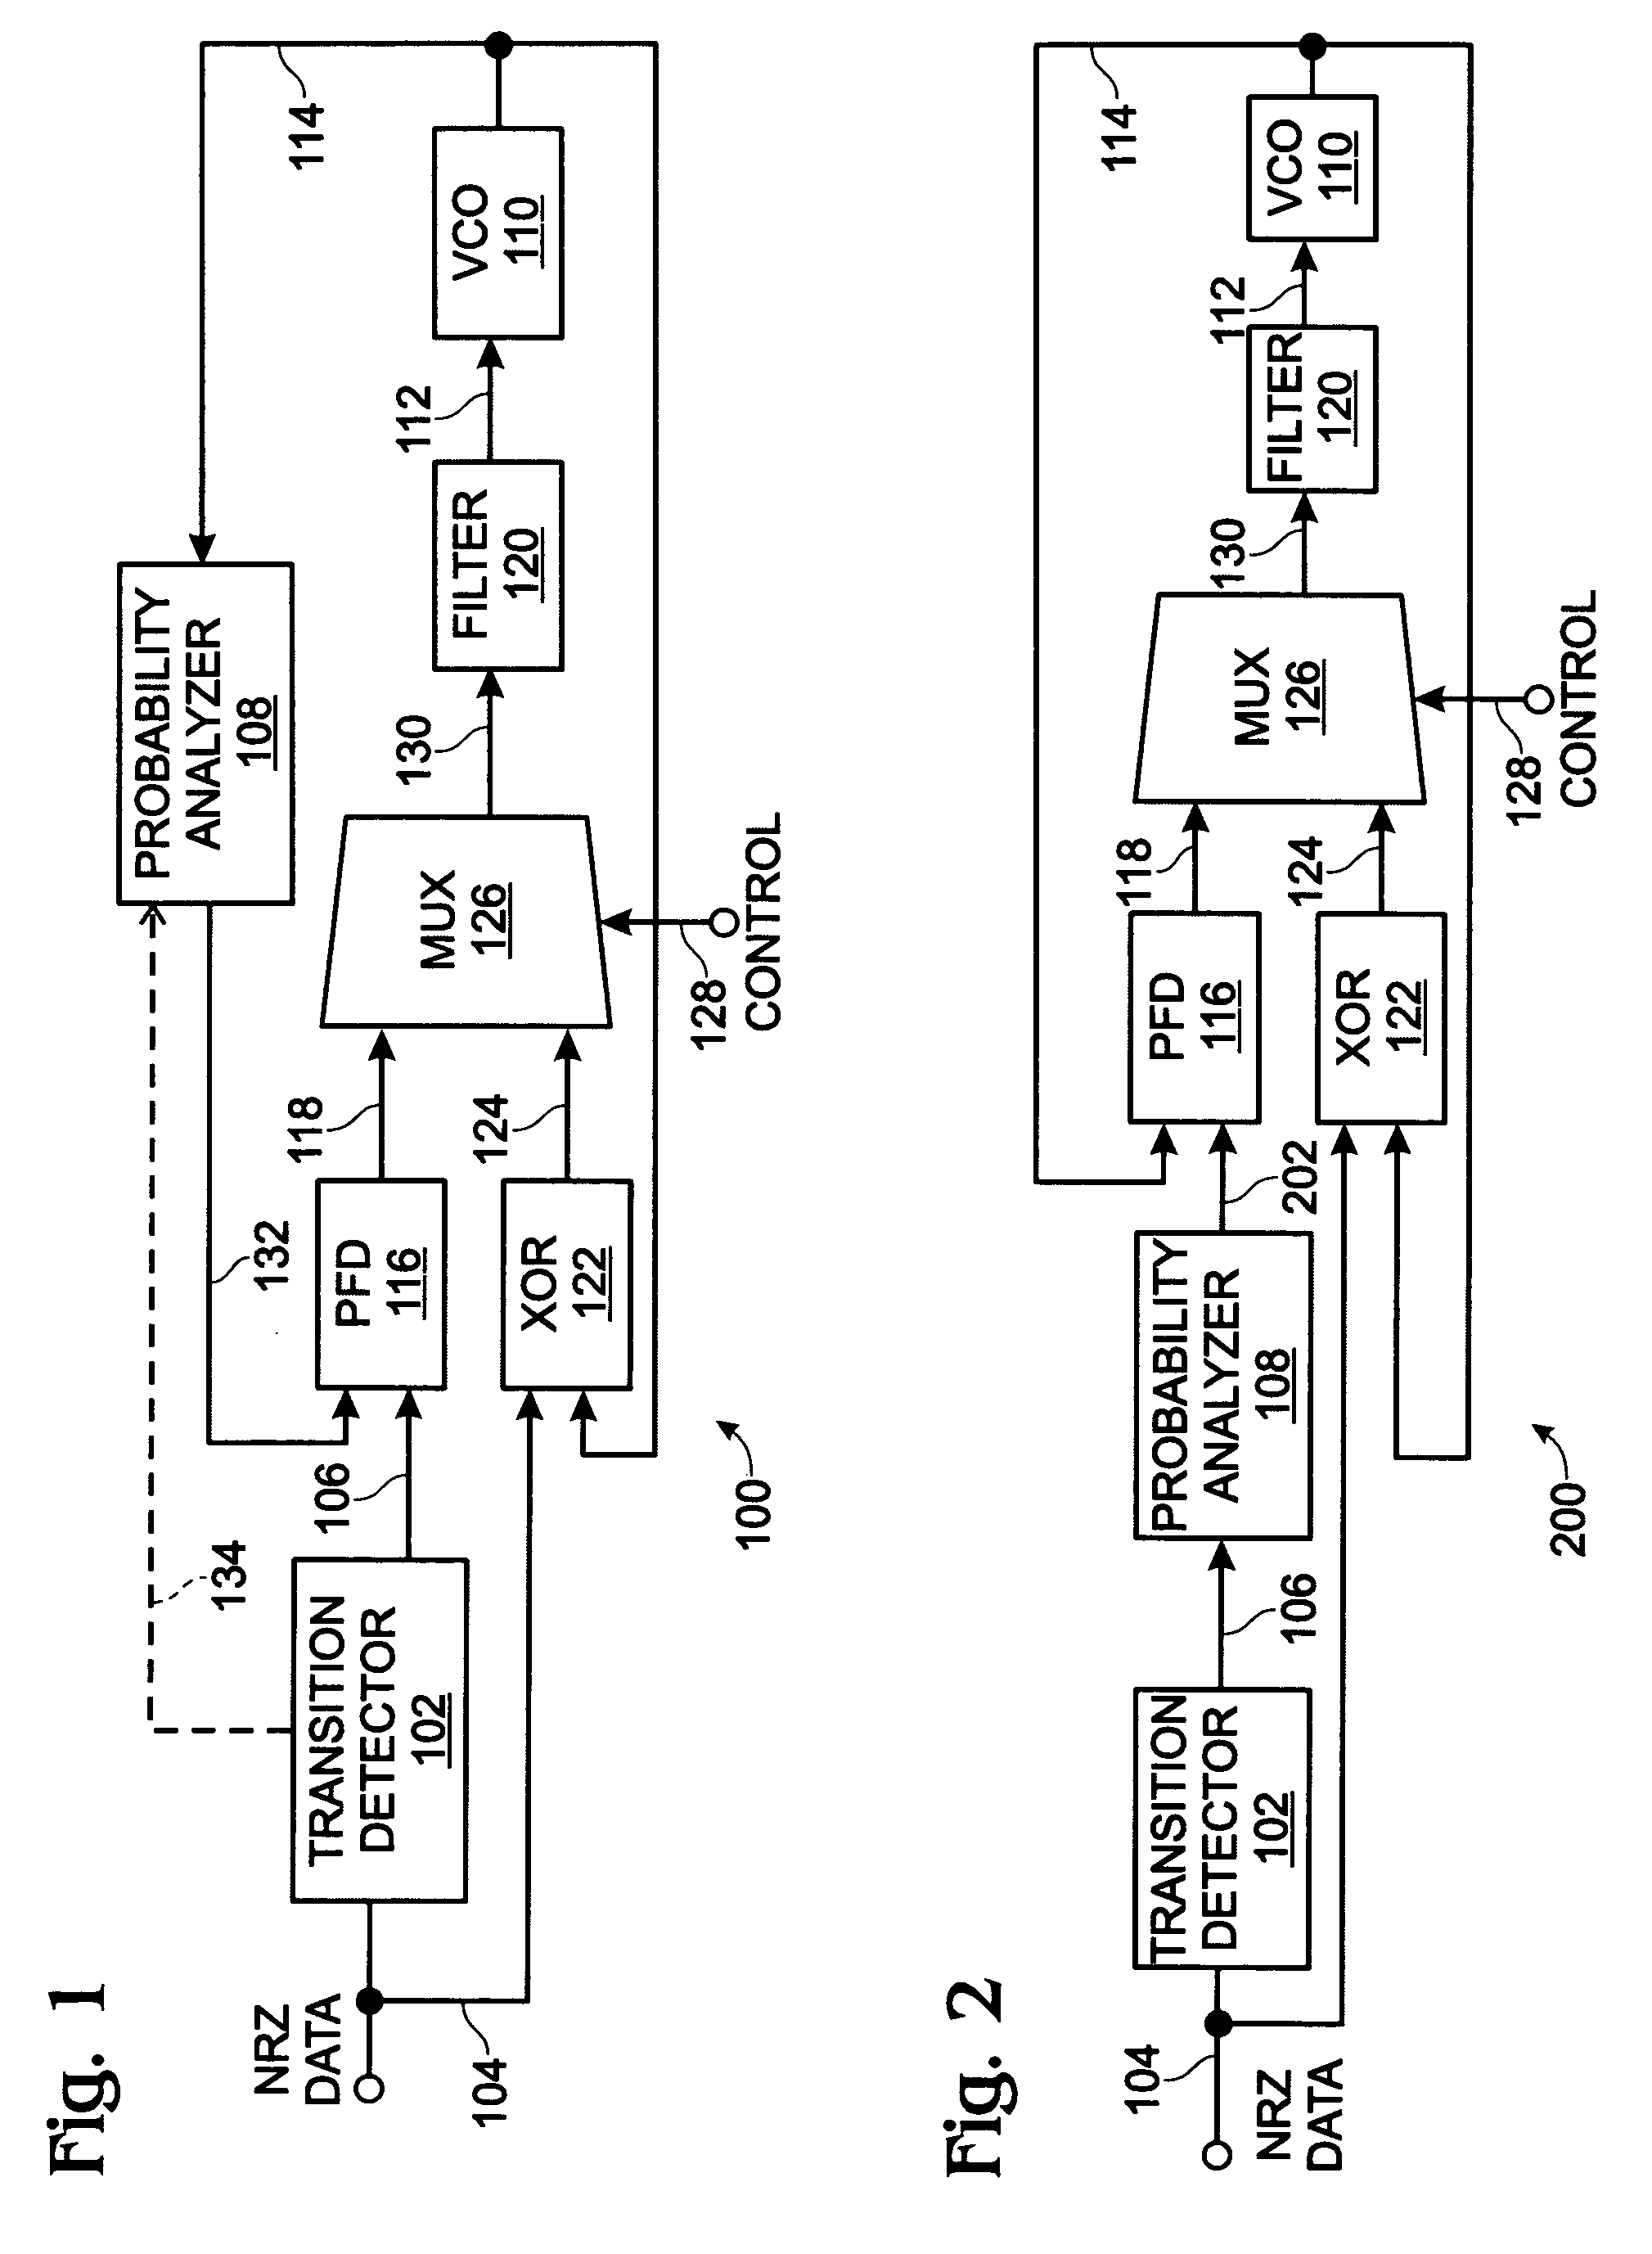 System and method for generating a reference clock